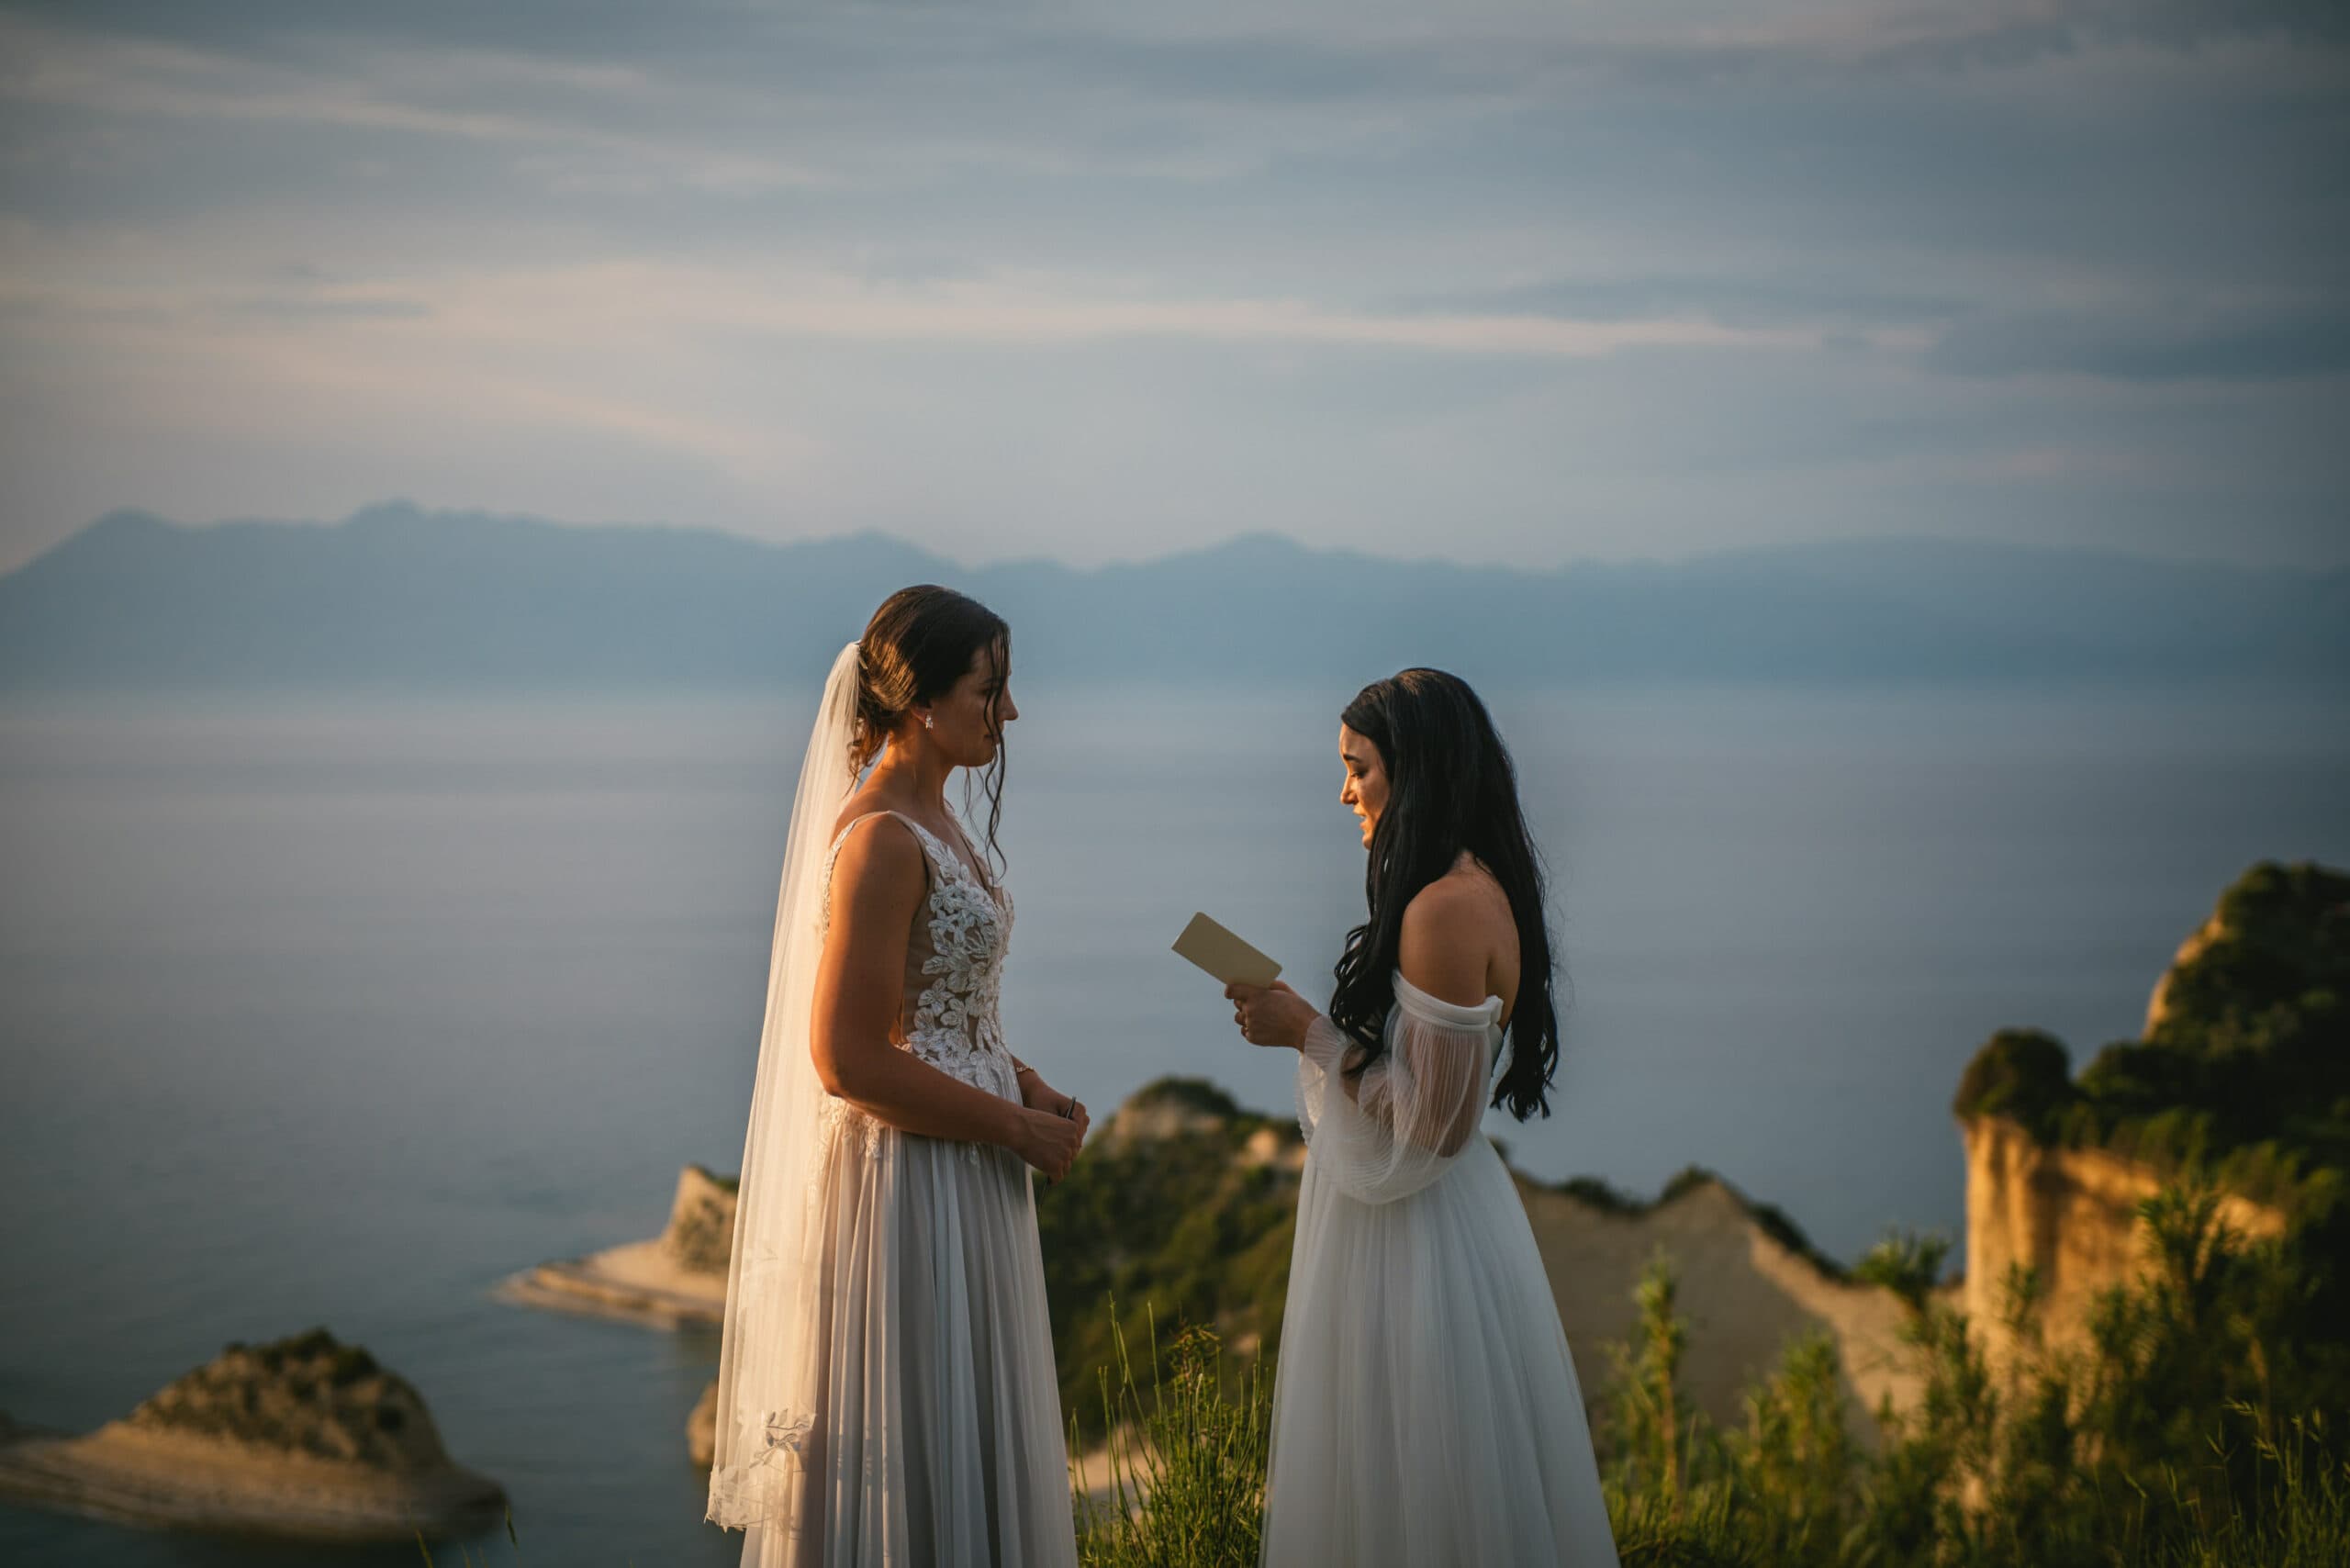 A serene moment of connection during the Corfu elopement ceremony.